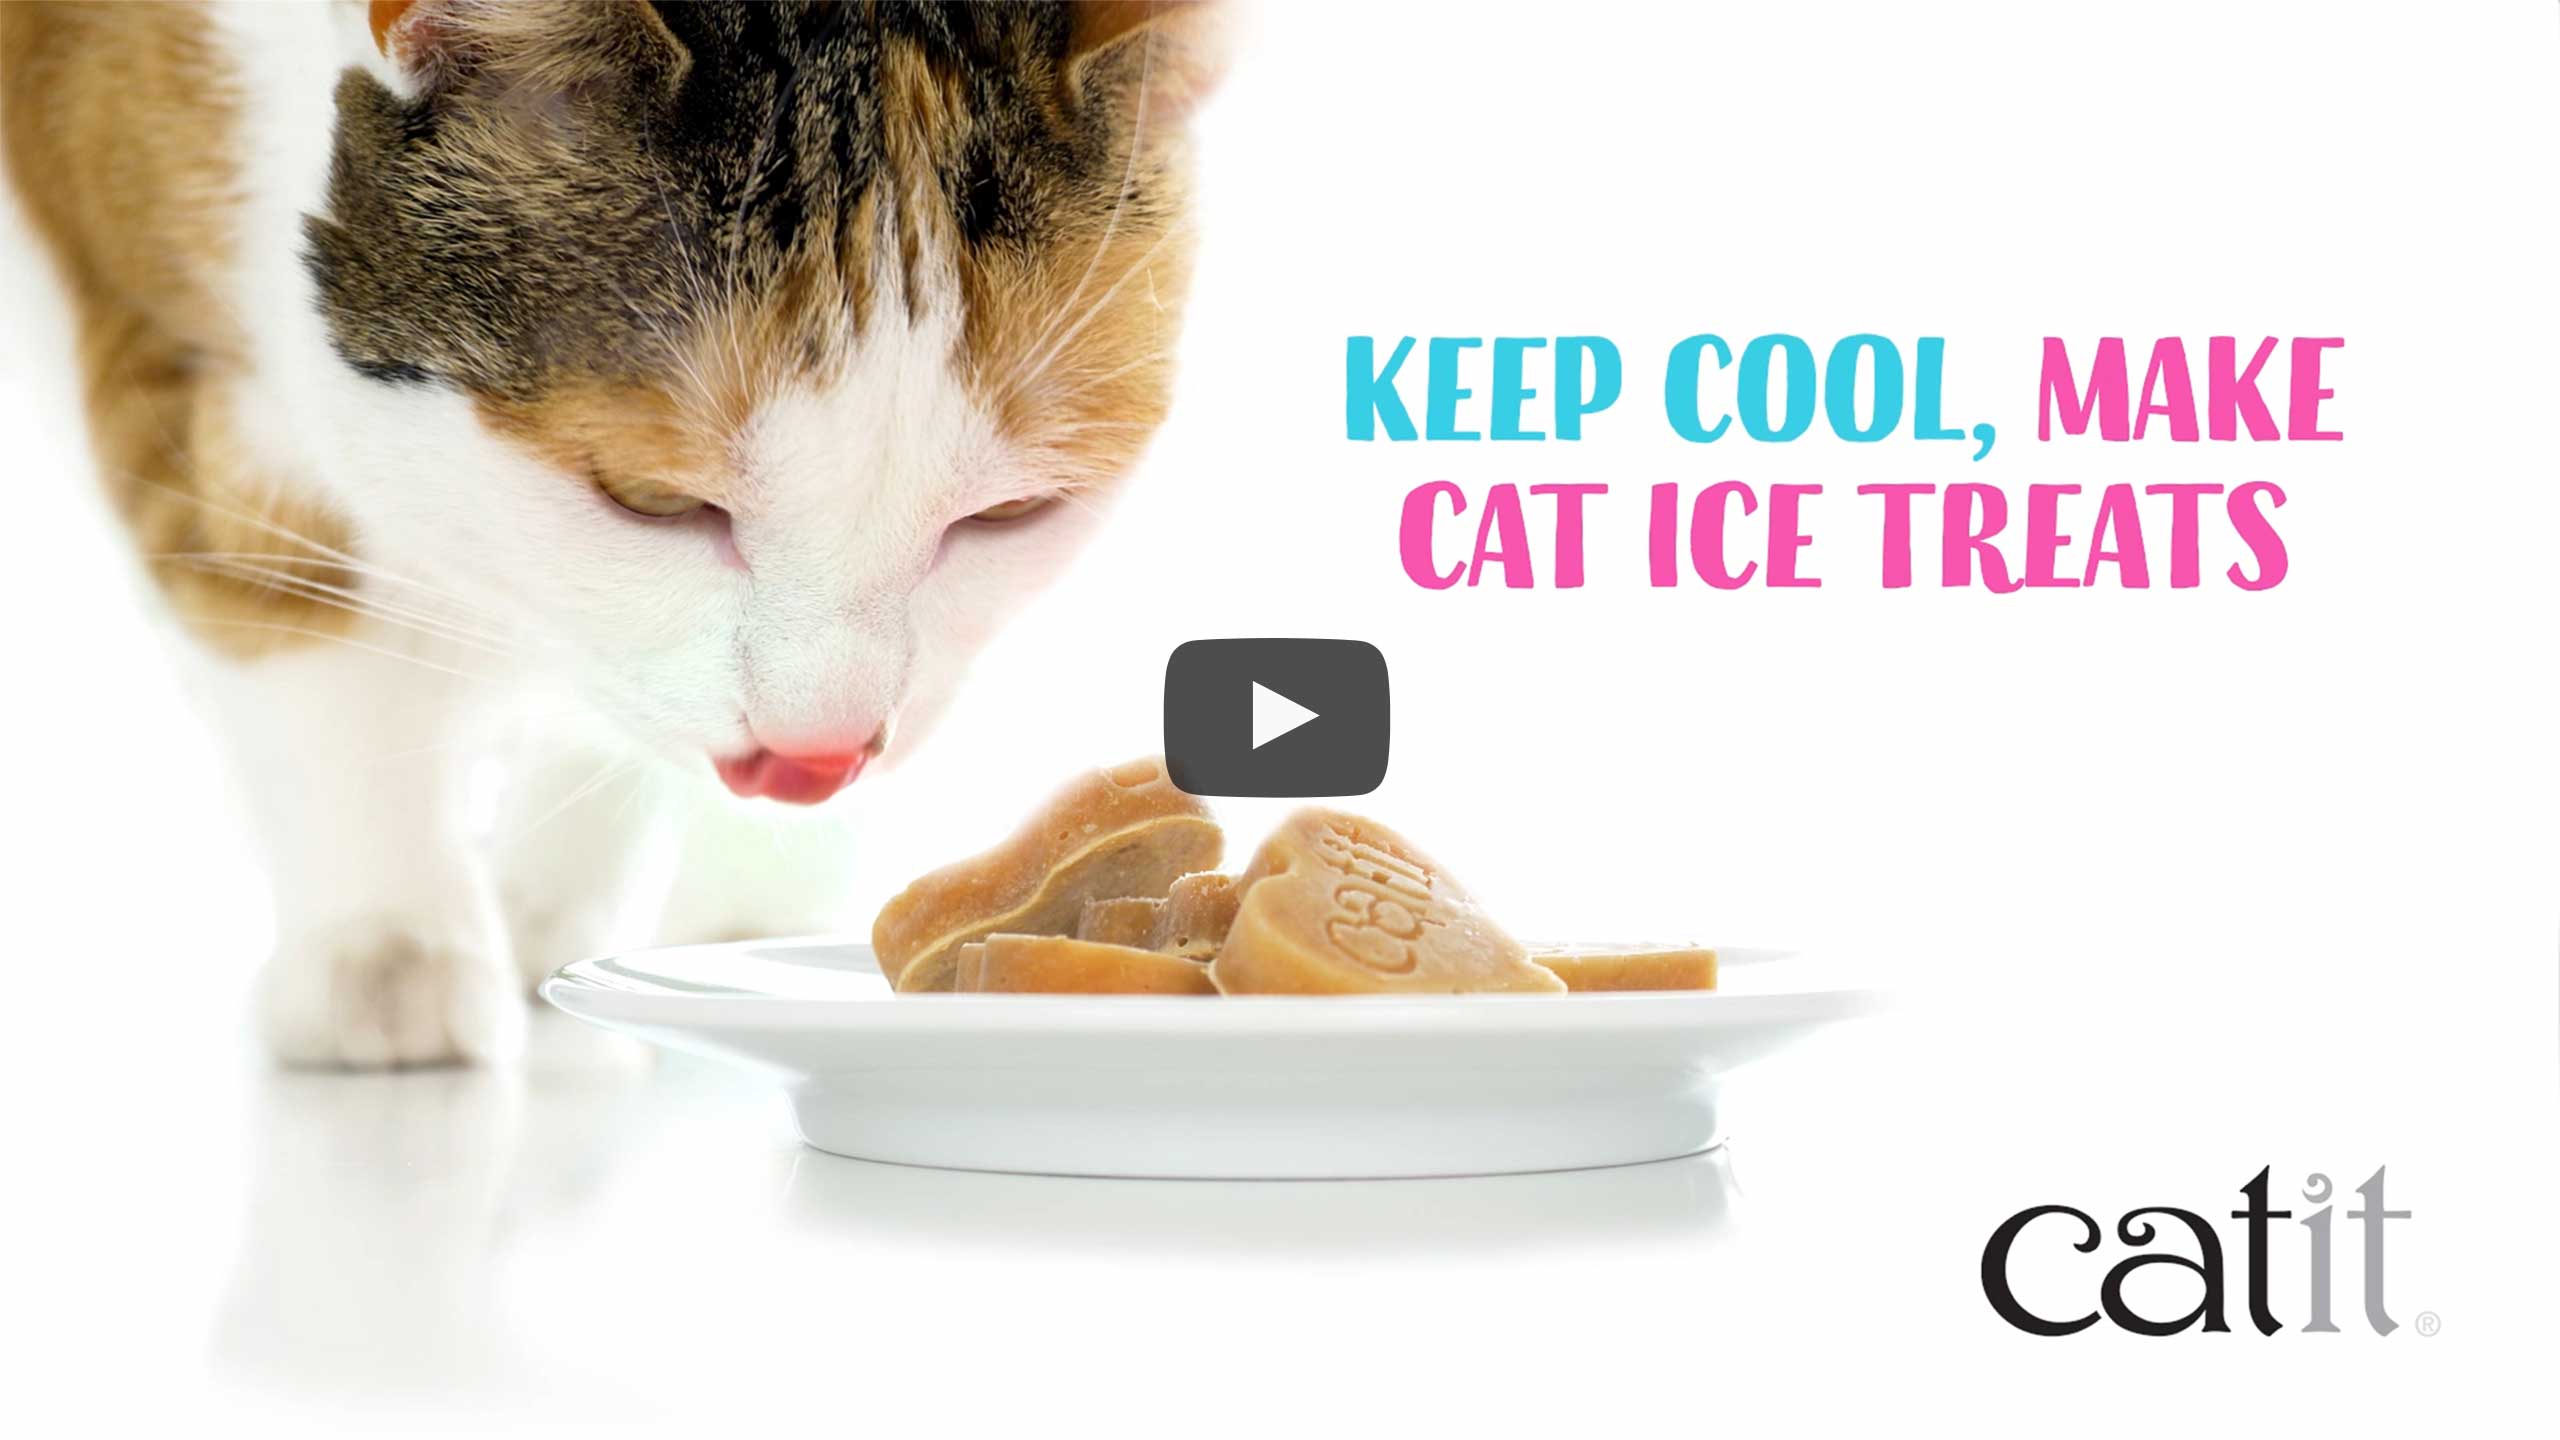 Make delicious, healthy and hydrating ice treats for cats with our Heart-Shaped Silicone Ice Tray.